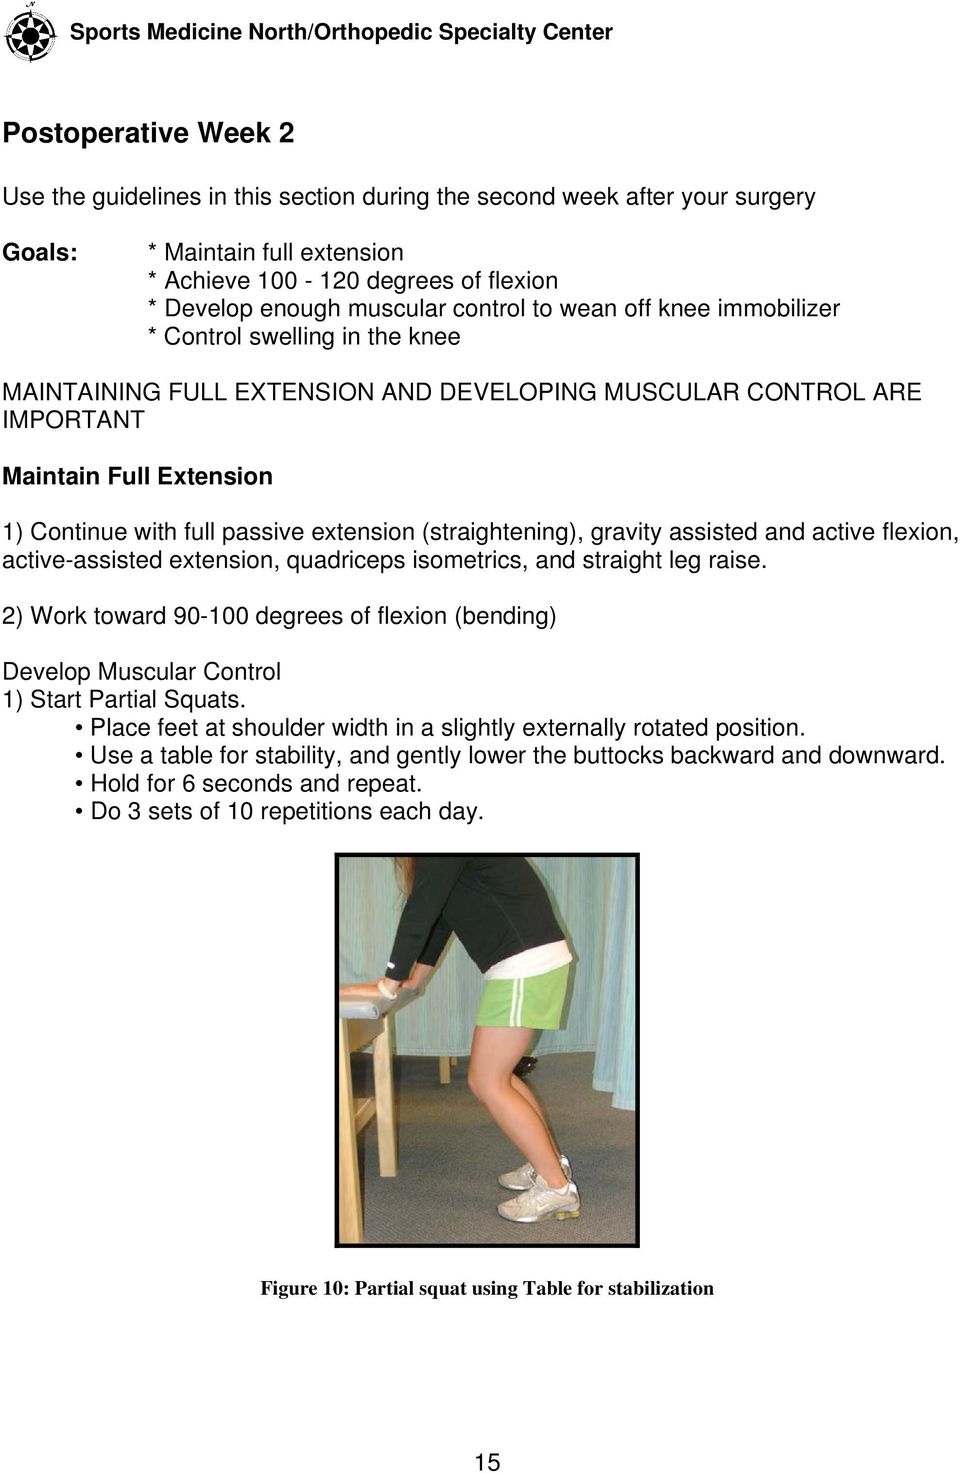 Extension 1) Continue with full passive extension (straightening), gravity assisted and active flexion, active-assisted extension, quadriceps isometrics, and straight leg raise.